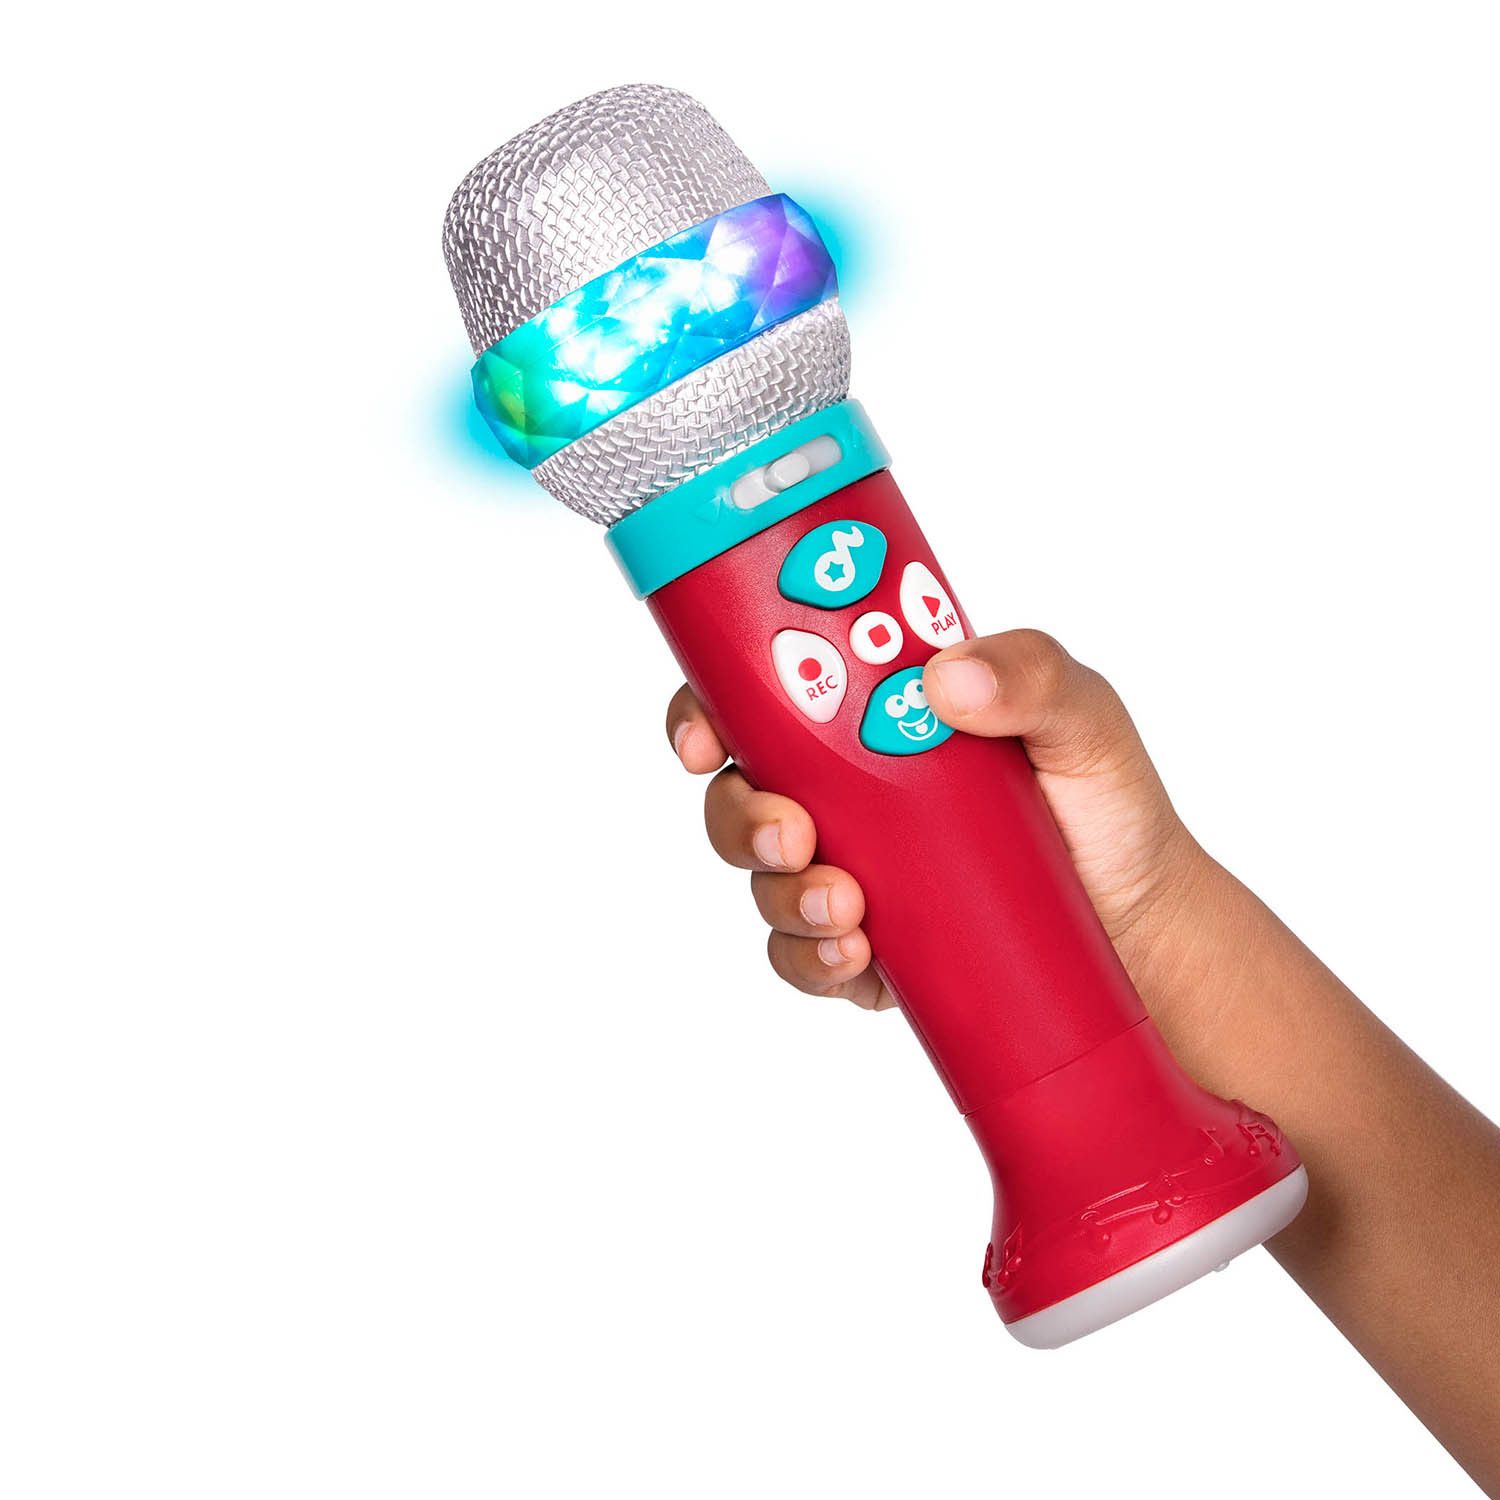 eKids Barbie Sing Along Boom Box Speaker with Microphone for Fans